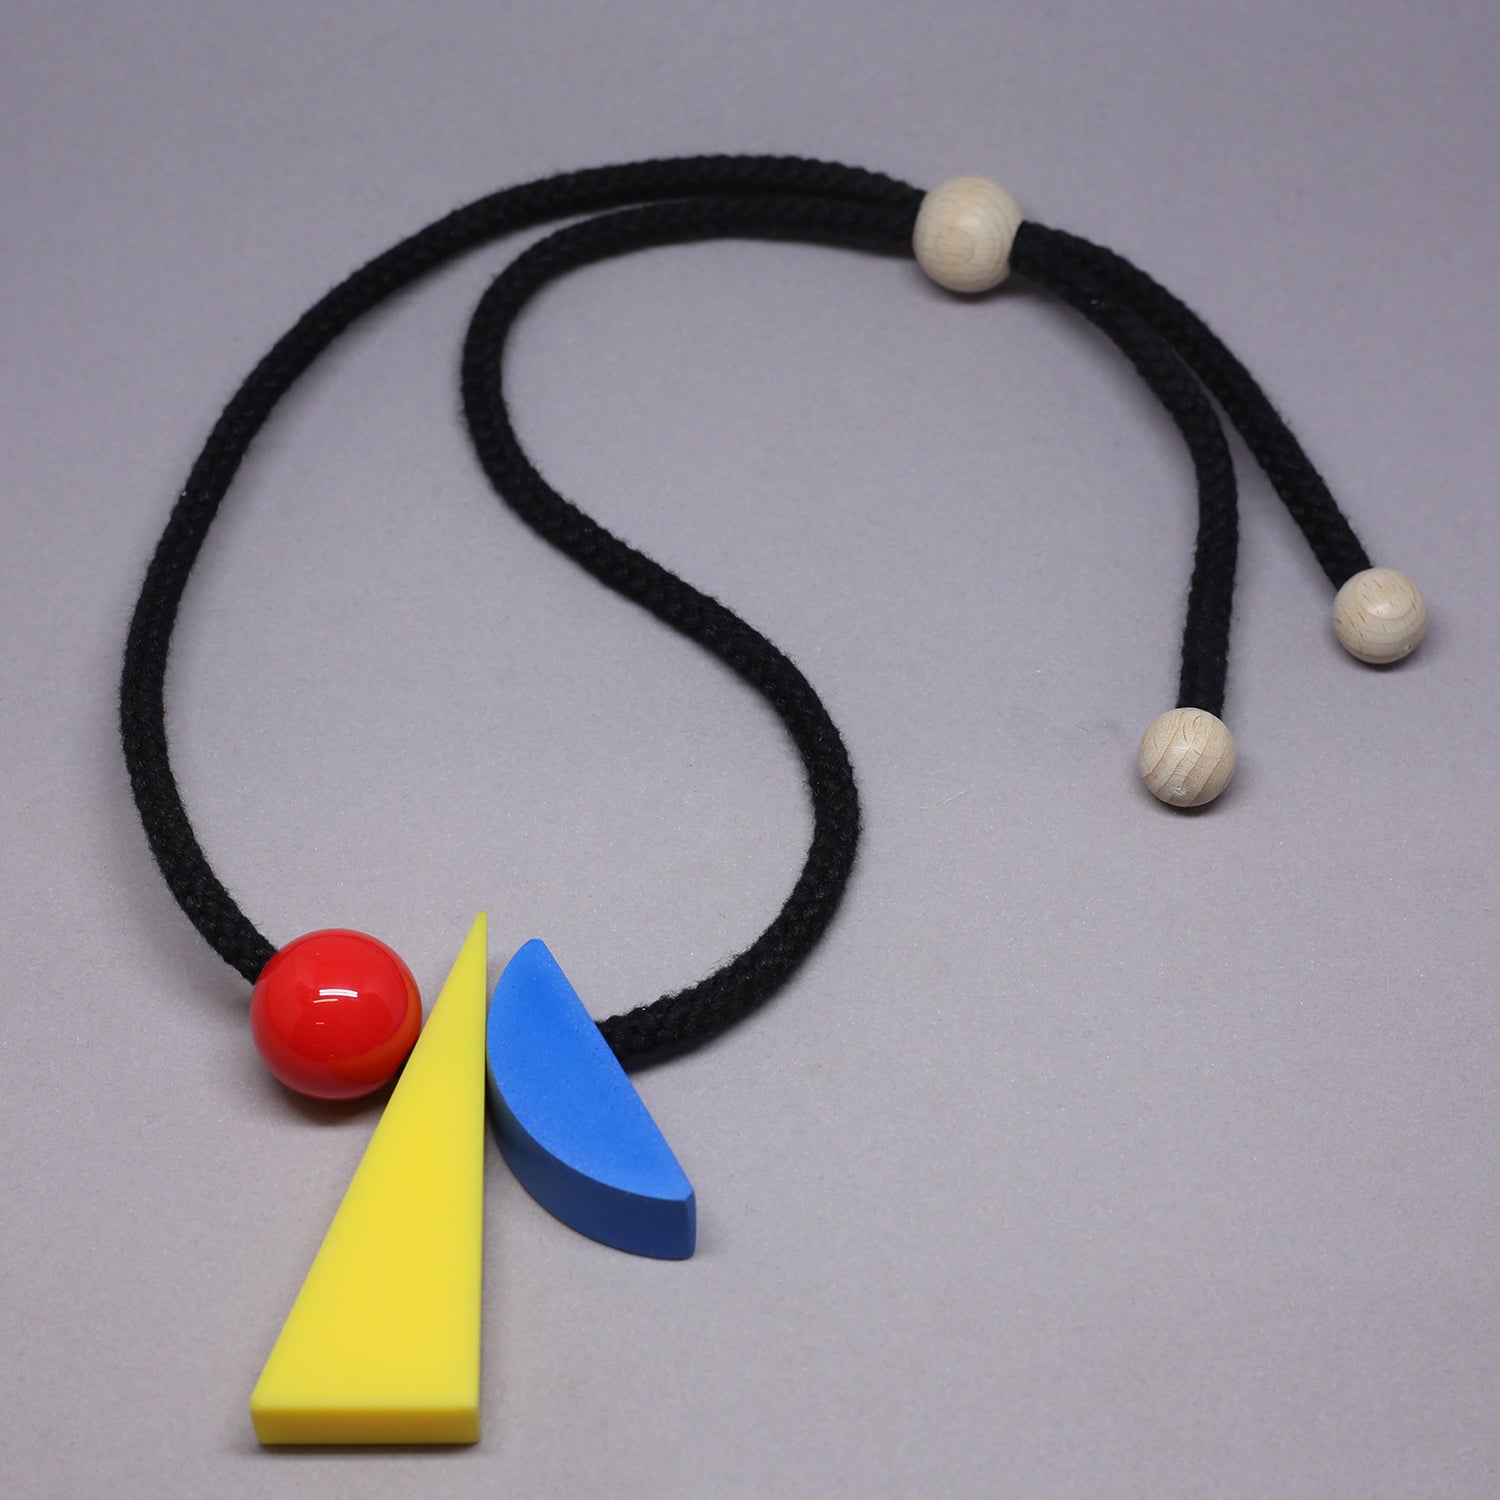 Veld necklace by One We Made Earlier. Bright, bold geometric accessory.